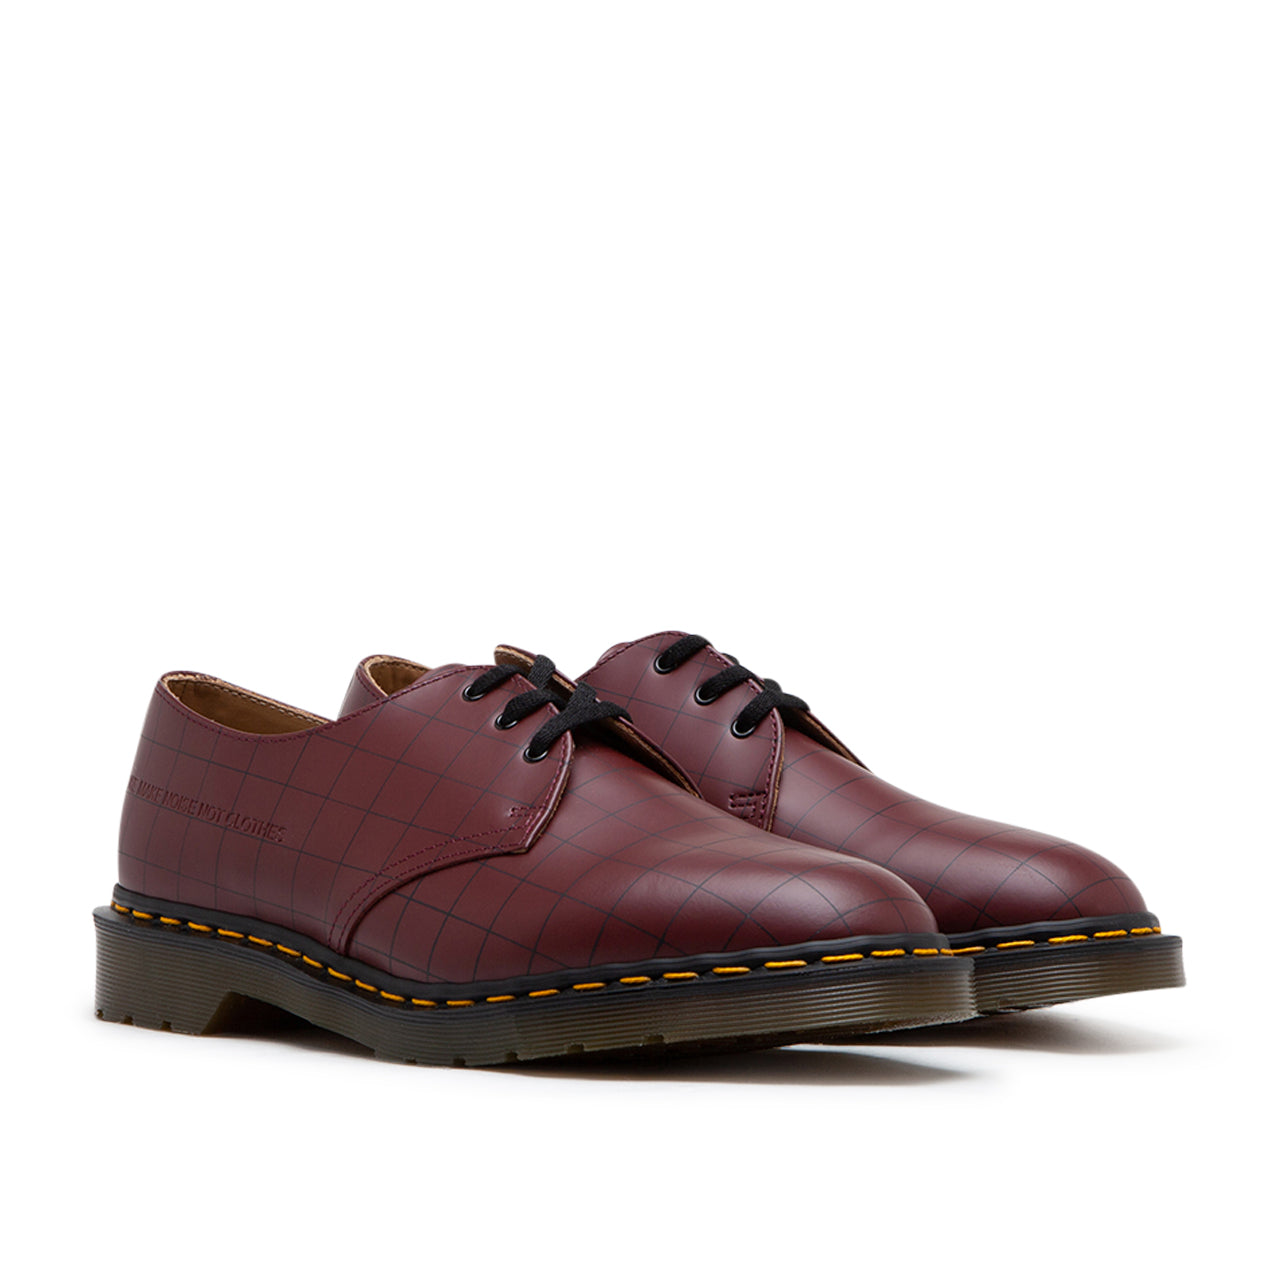 Dr. Martens x Undercover 1461 Check Smooth (Rot)  - Allike Store